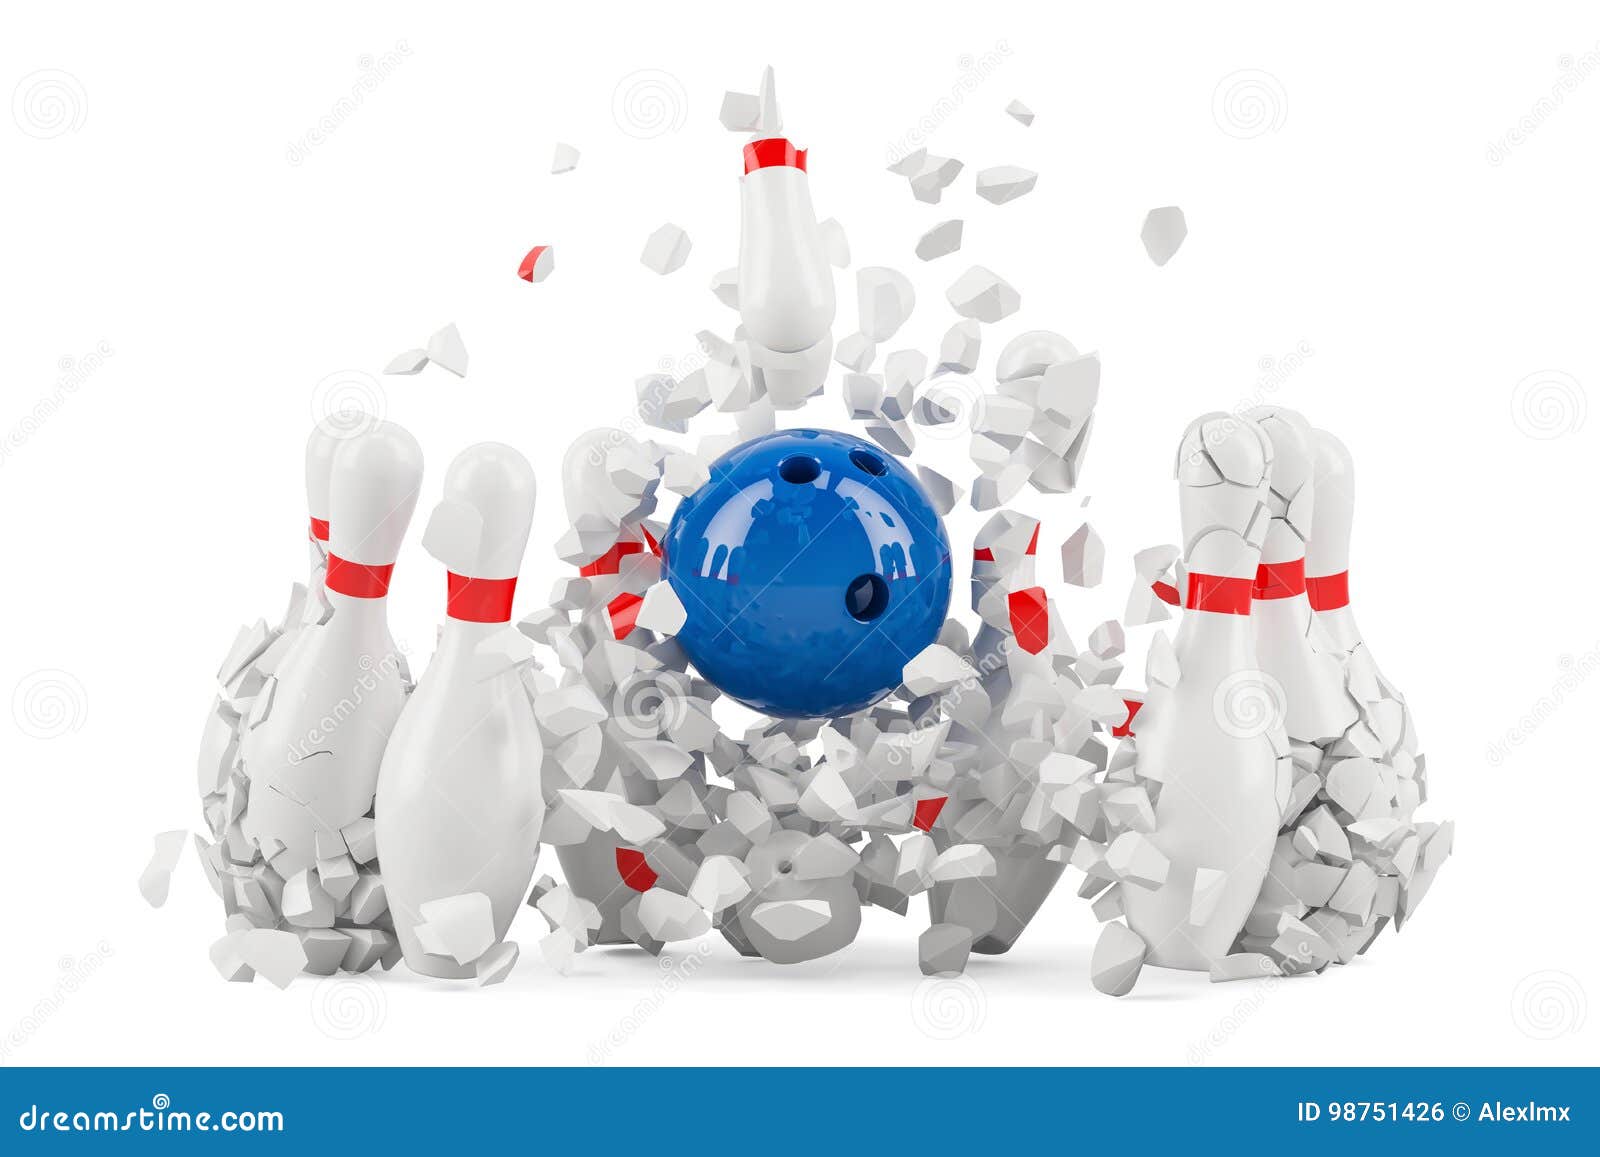 Bowling pins destroyed, 3D stock illustration. Illustration of hobby